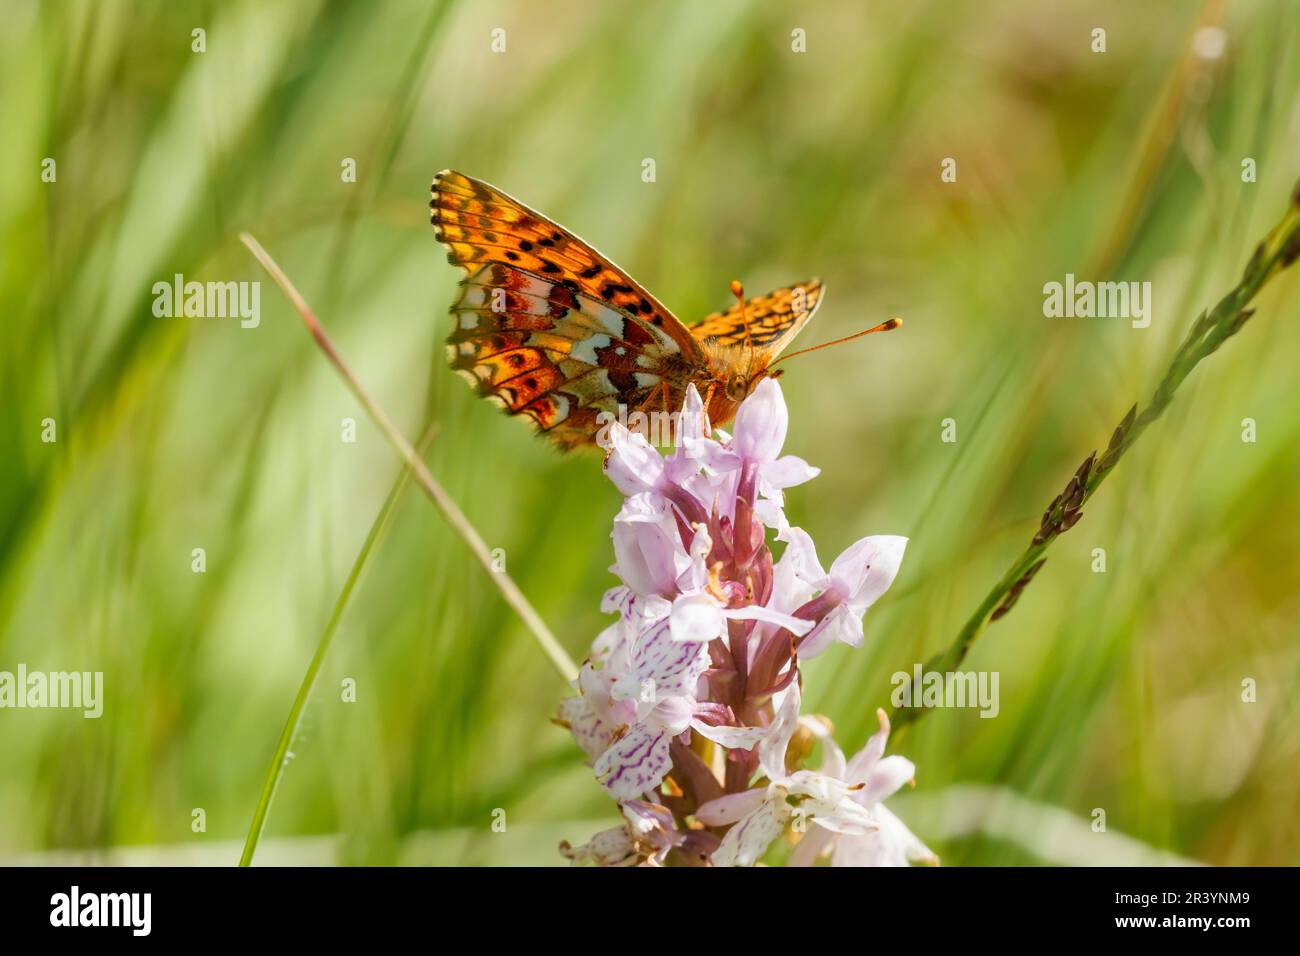 Boloria aquilonaris, known as the Cranberry fritillary butterfly Stock Photo